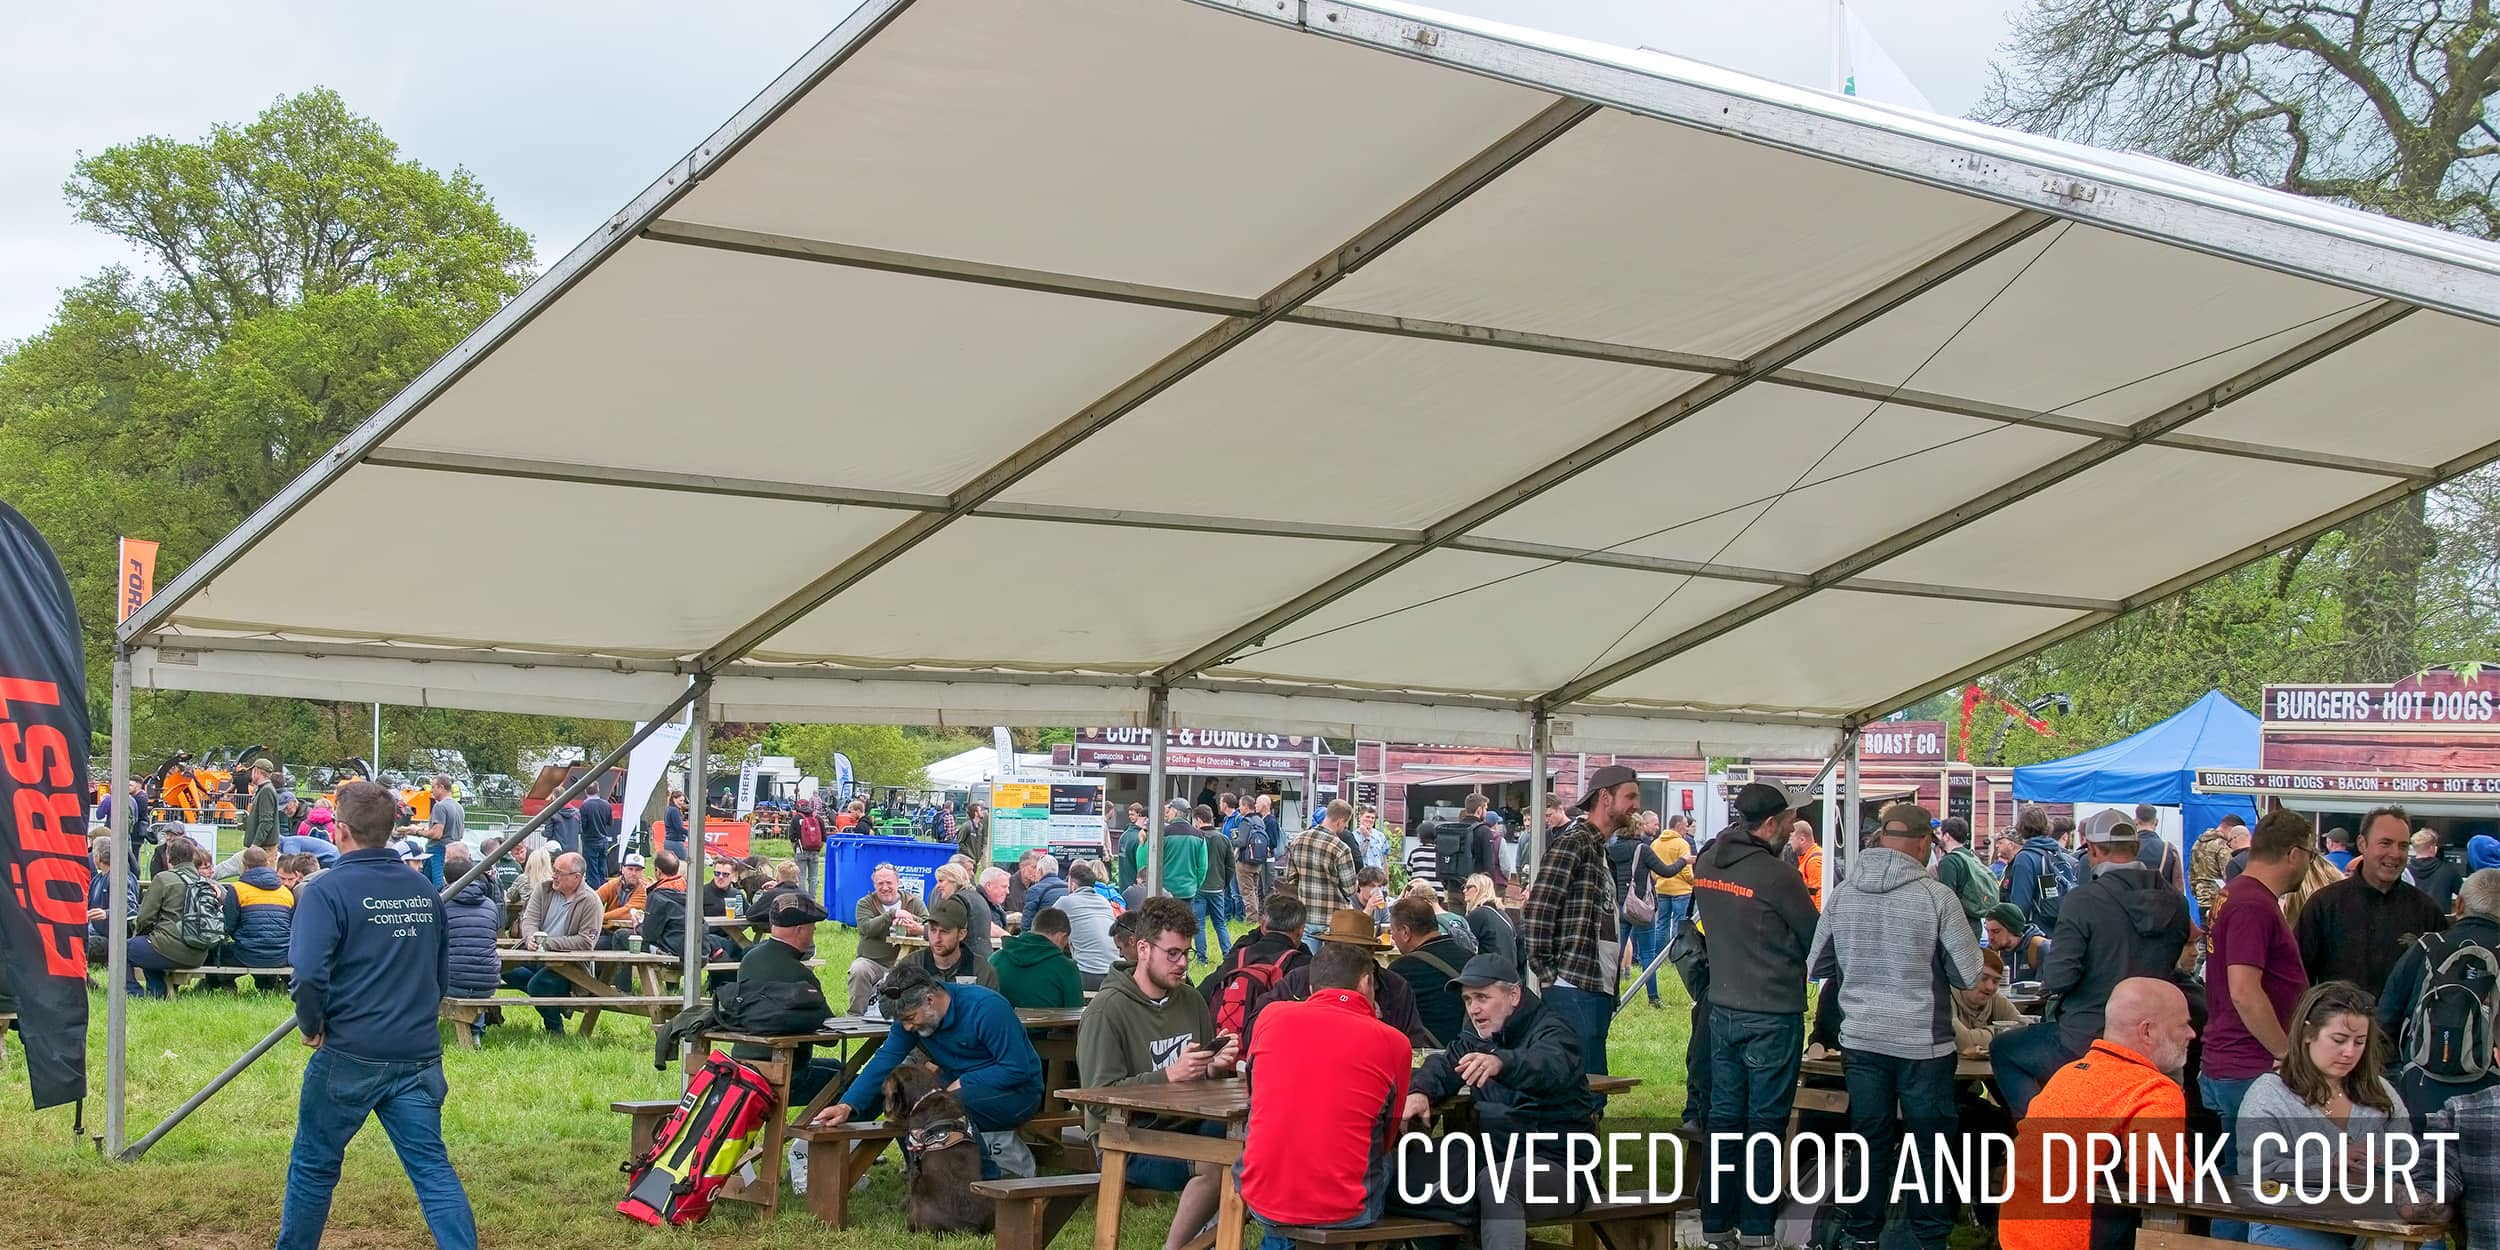 The covered food and drink court proved popular